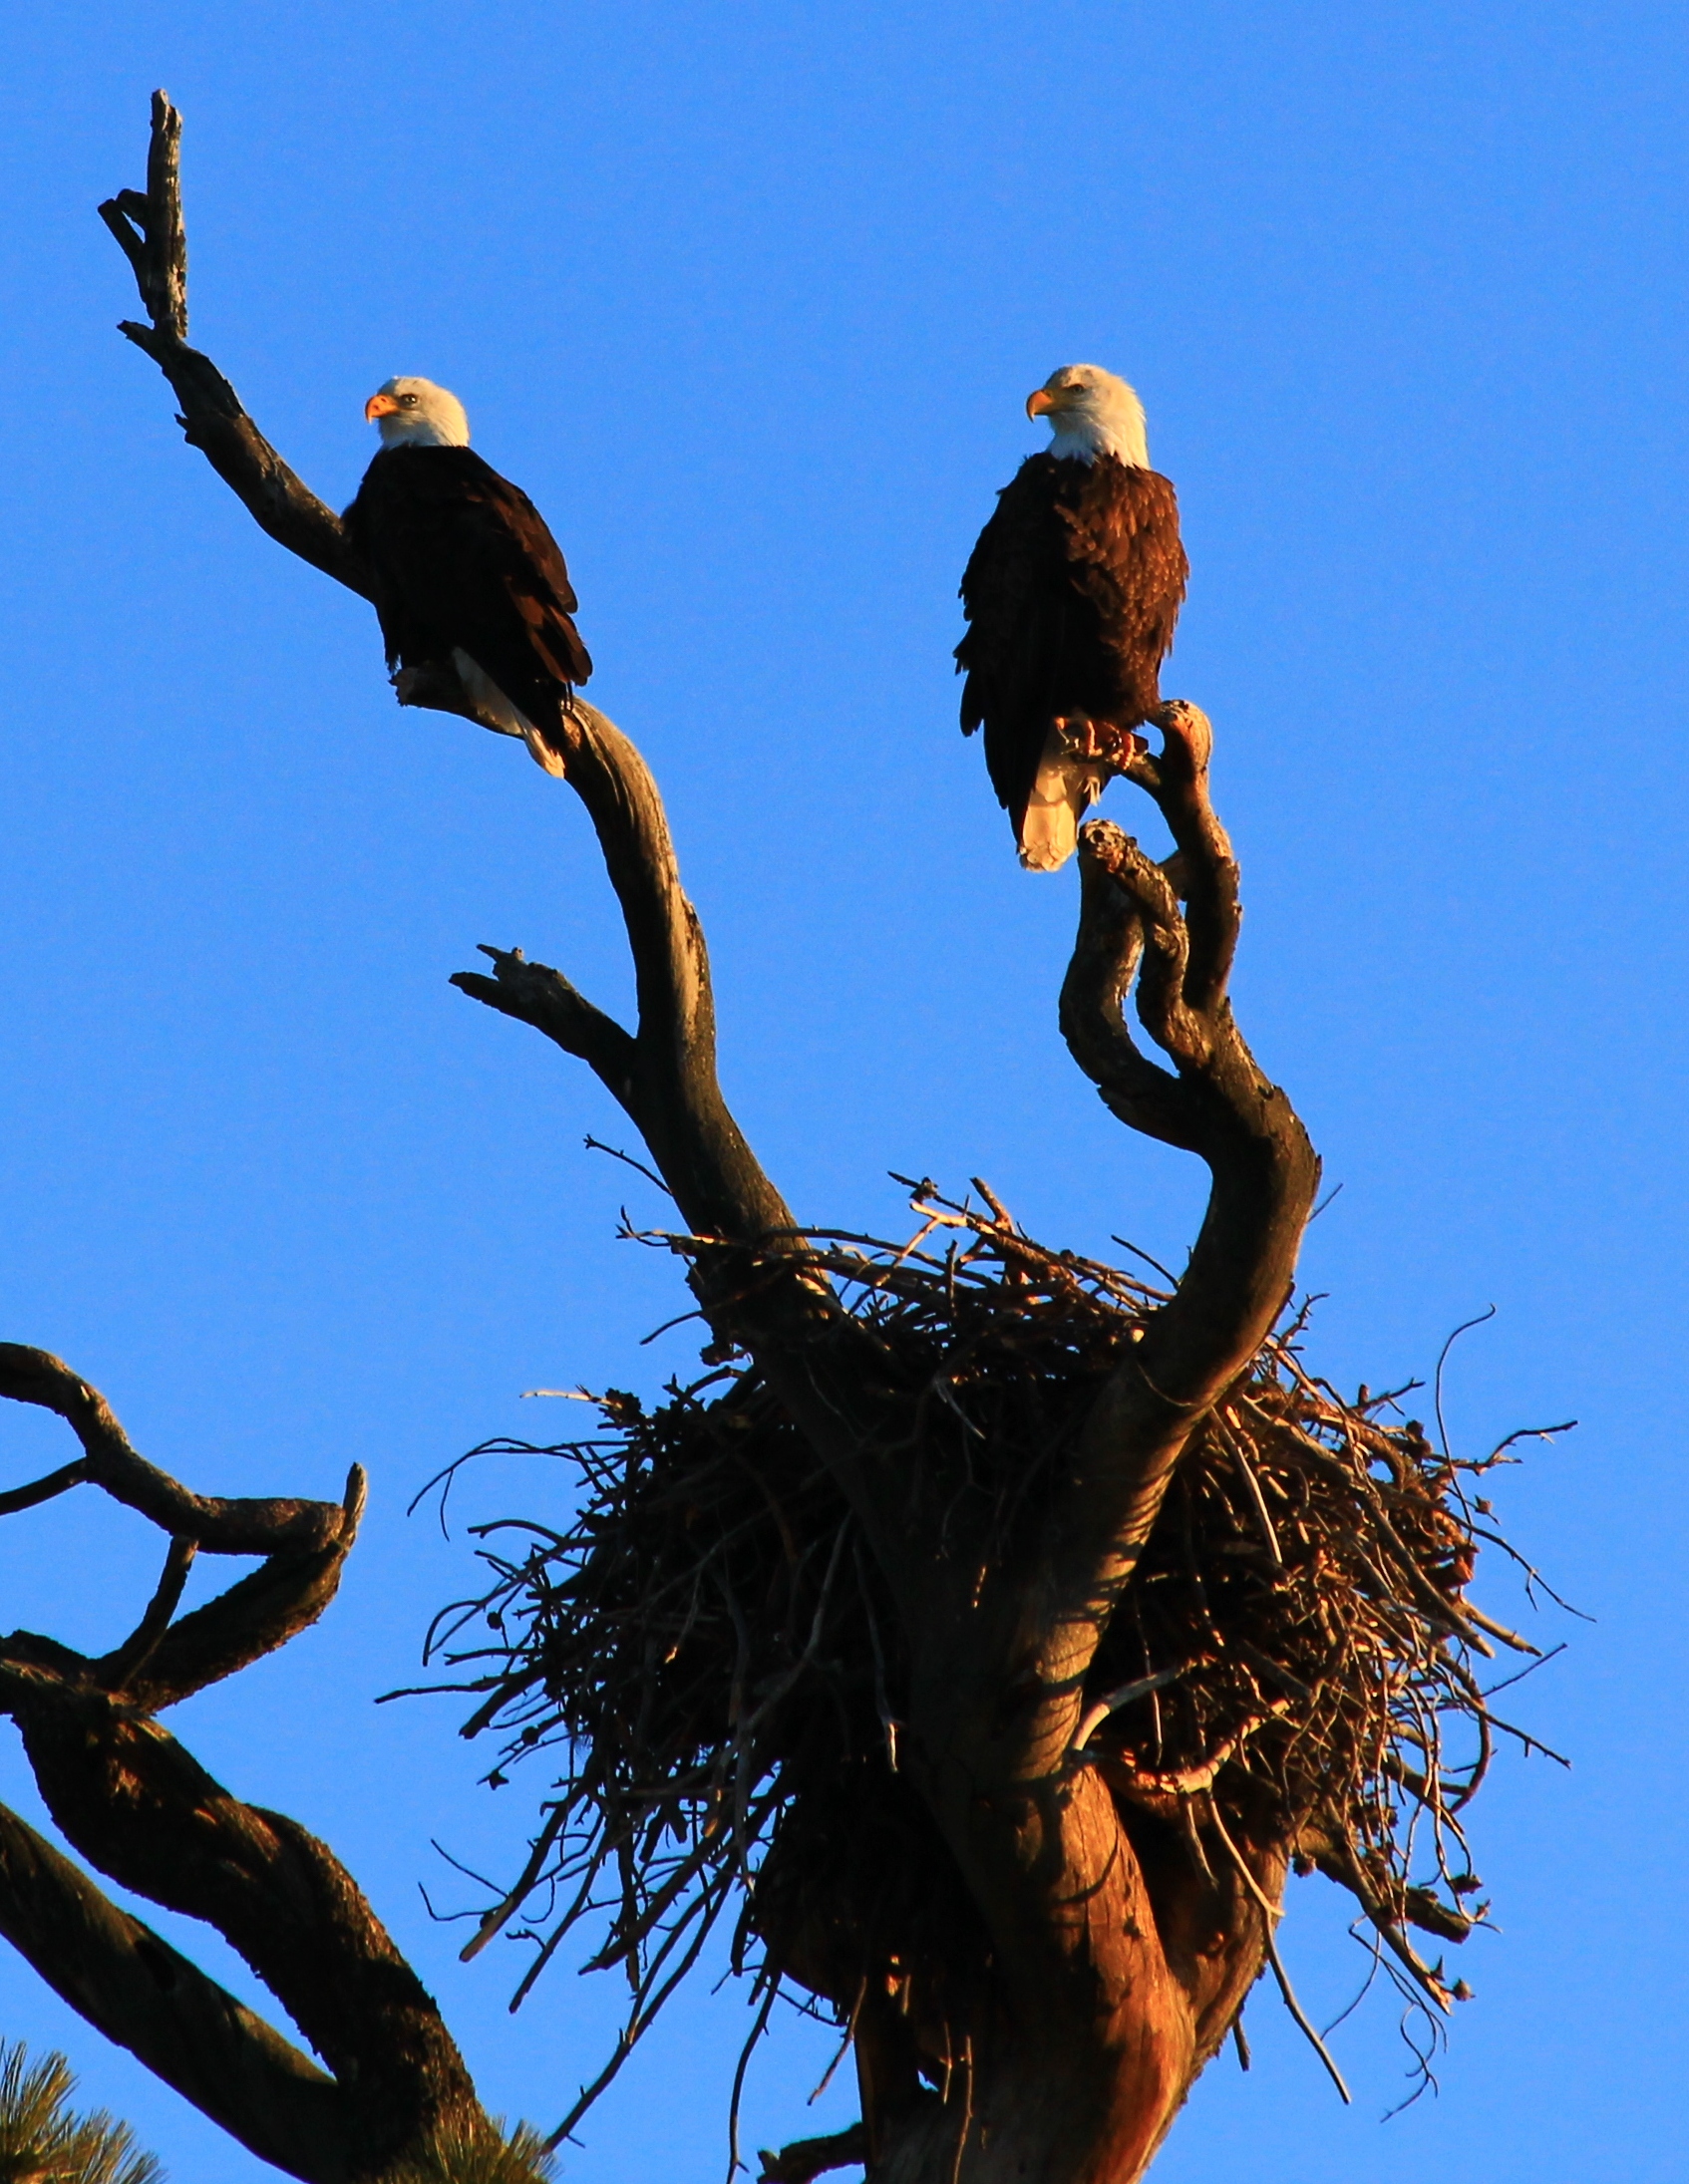 Are bald eagle nests competition for This Old House? - Indeed, they are. Bald eagles build enormous nests high in the treetops. The male and female build their nest together, and this quality time helps them cement their lifelong bond. Their cozy nurseries consist of a framework of sticks lined with softer stuff such as grass and feathers. If the nest serves them well during the breeding season, they'll keep using it year after year. And, like all homeowners, they can't resist the thought of renovating and adding to their abode. Every year, they'll spruce it up with a whopping foot or two of new material.On average, bald eagle nests are 2-4 feet deep and 4-5 feet wide. But one pair of eagles near St. Petersburg, Florida, earned the Guinness World Record for largest bird’s nest: 20 feet deep and 9.5 feet wide. The nest weighed over two tons.